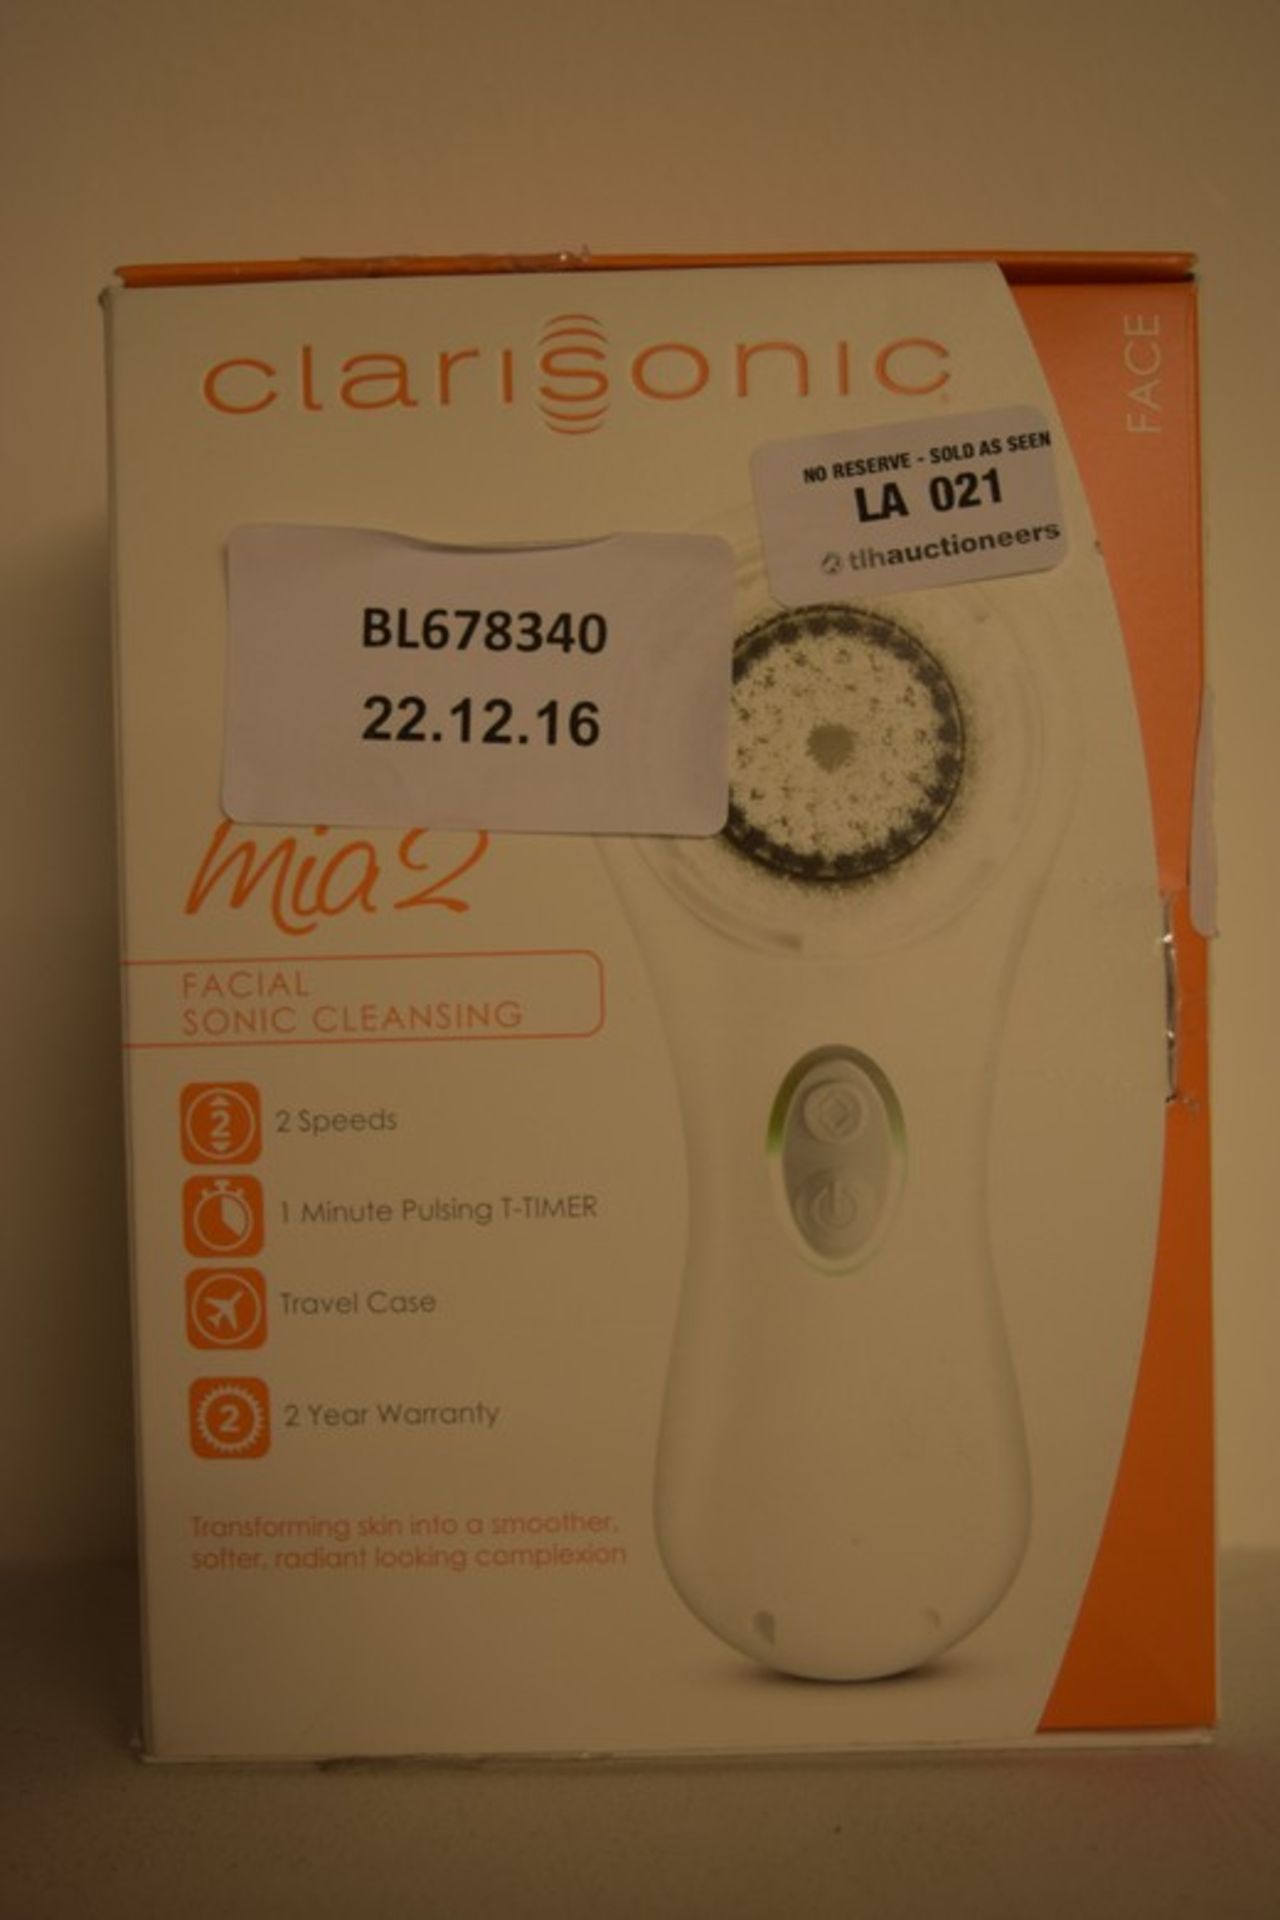 1 x BOXED CLARISONIC FACIAL SONIC CLEANSING DEVICE RRP £80 (22.12.2016) *PLEASE NOTE THAT THE BID